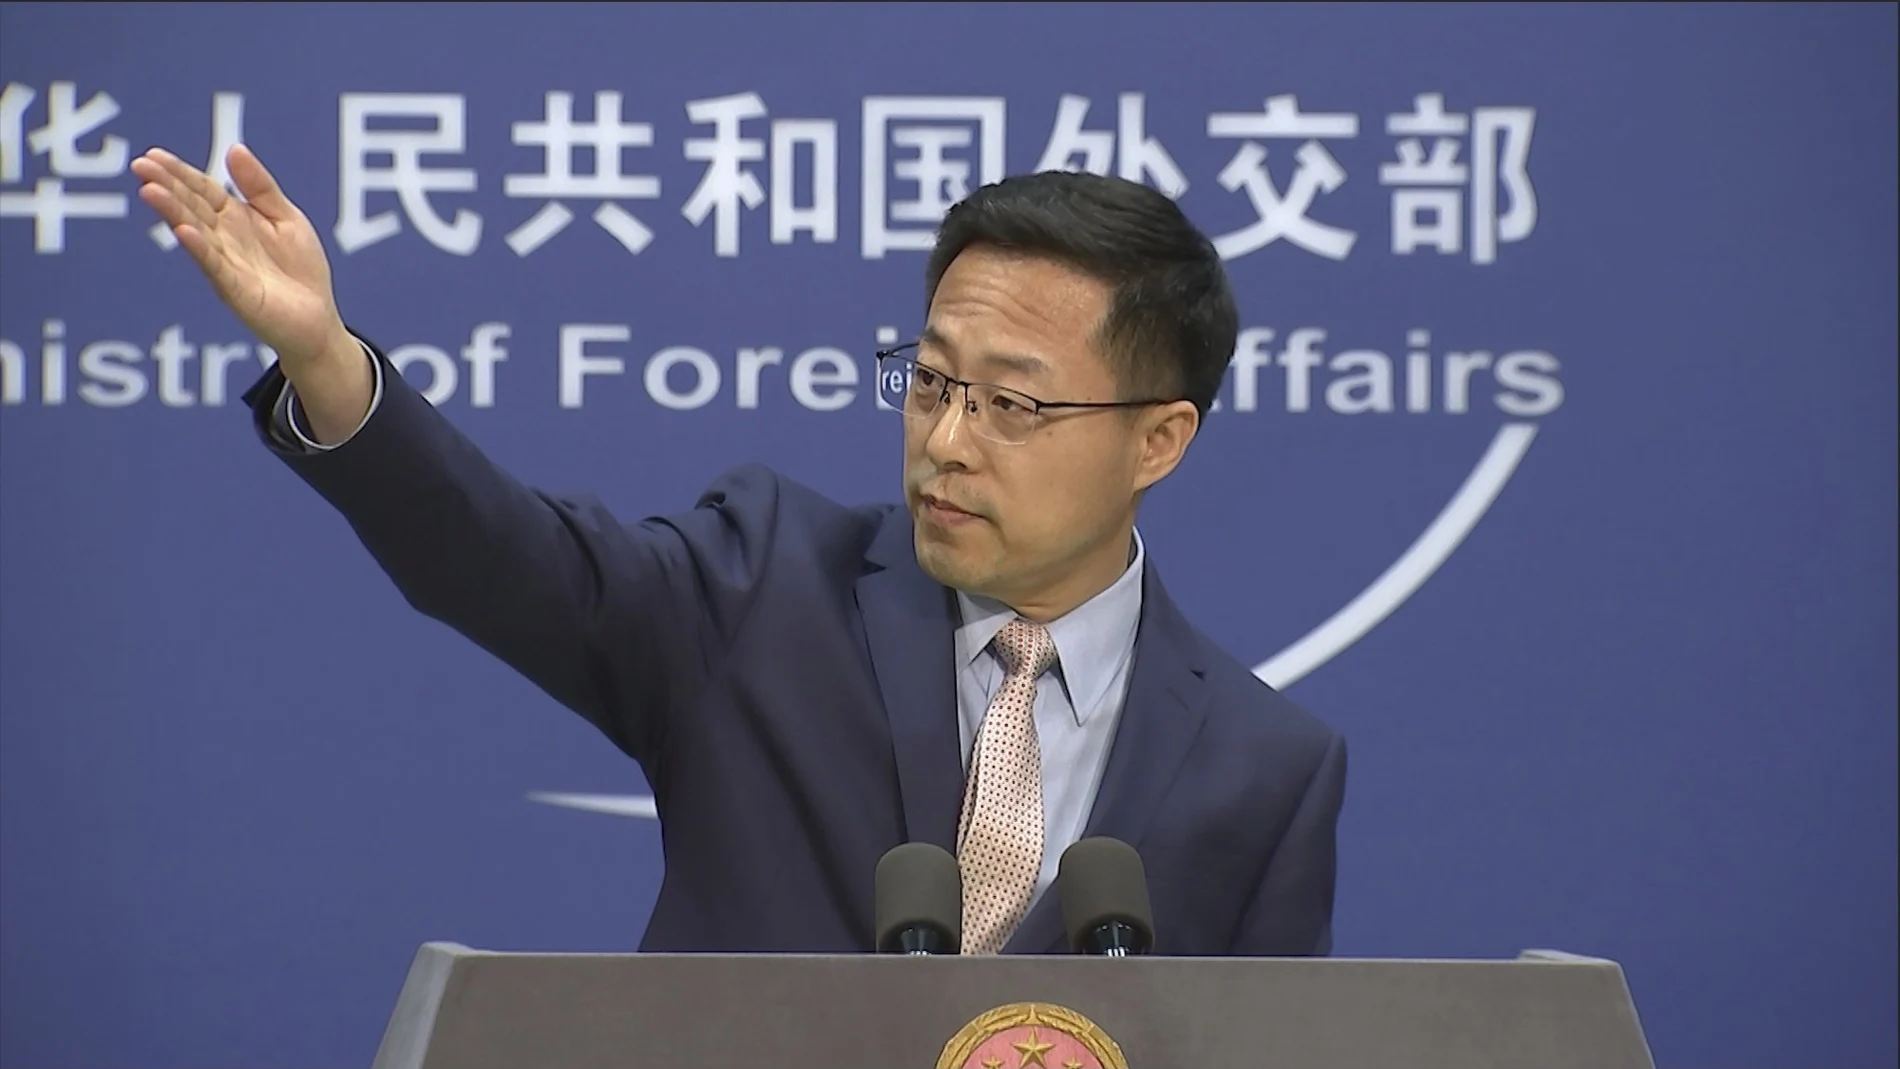 Chinese foreign ministry spokesperson Zhao Lijian gestures during a press briefing in Beijing on Monday, Nov. 23, 2020. China on Monday lashed out at Washington over its withdrawal from the "Open Skies Treaty" with Russia, saying the move undermined military trust and transparency and imperiled future attempts at arms control. (AP Photo/Liu Zheng)